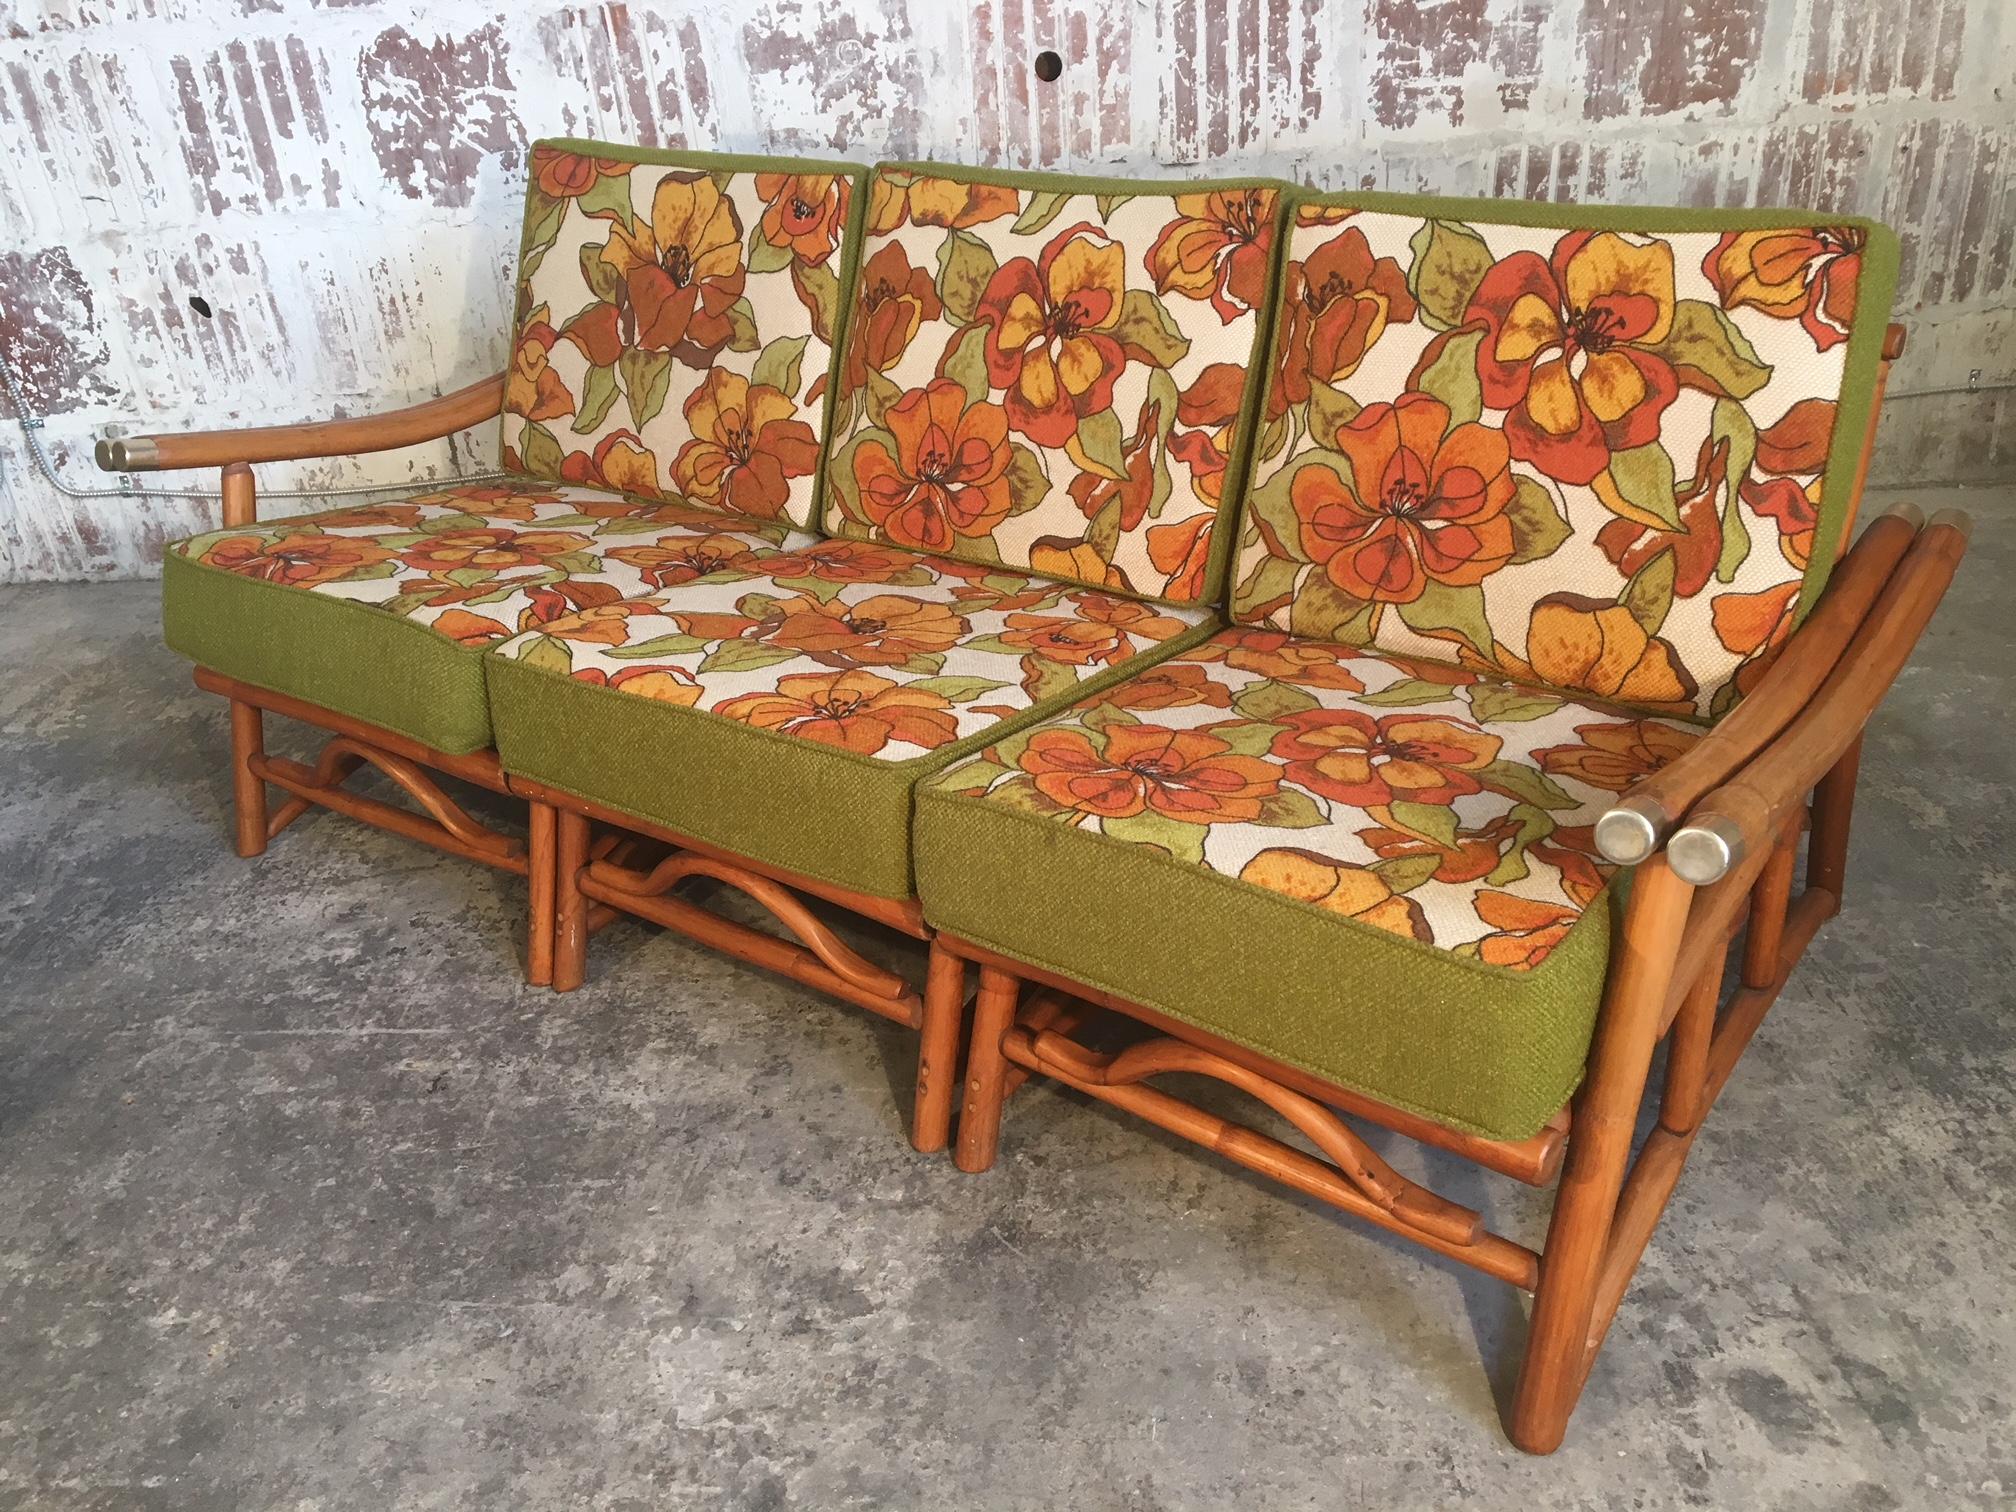 Vintage Ficks Reed bamboo at it's finest. Three-piece sectional sofa with floral upholstered cushions and a low, lounge-like stance. Very good condition with only very minor signs of age appropriate wear.  Professional reupholstery available, ask